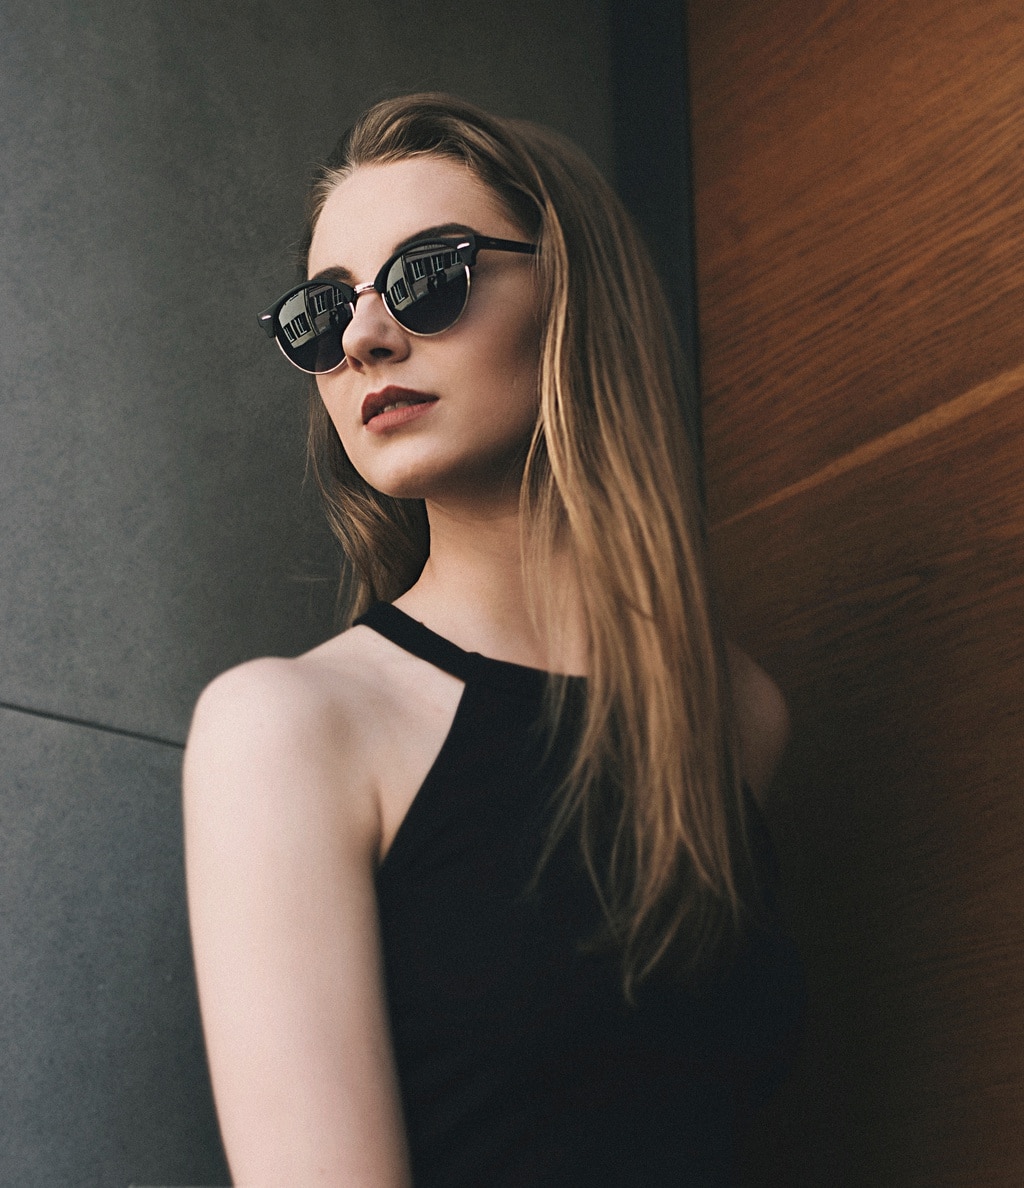 Girl hanging out wearing sunglasses